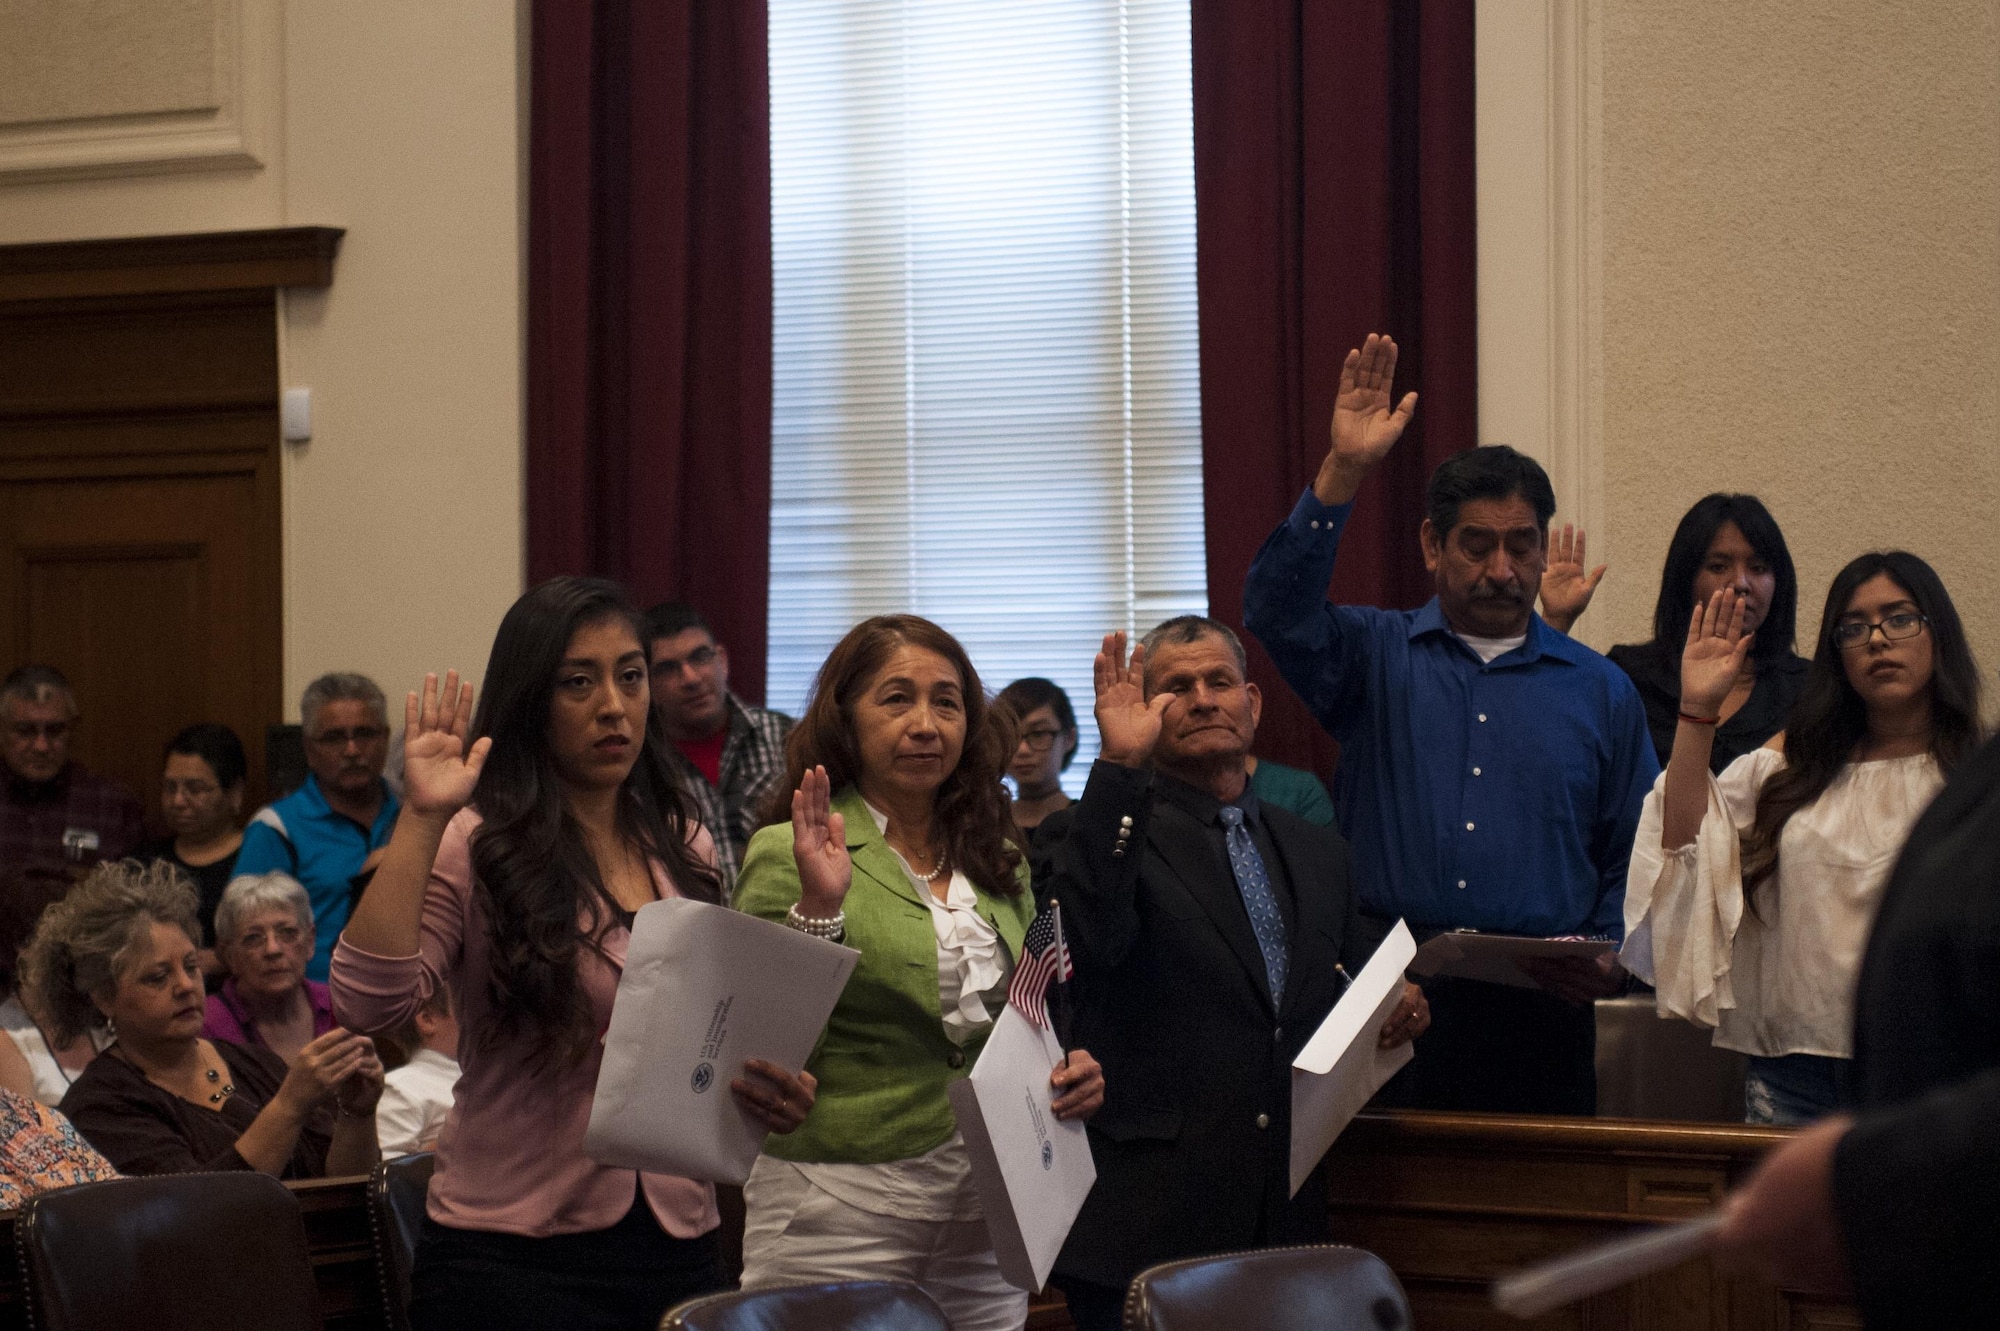 Newly nationalized American citizens swear an oath of citizenship in the O.C. Fisher Building, San Angelo, Texas, June 7, 2017. The naturalization ceremony gave citizenship to individuals from almost every part of the world including Mexico, China, Malaysia, Brazil and Nicaragua. (U.S. Air Force photo by Senior Airman Scott Jackson/Released)